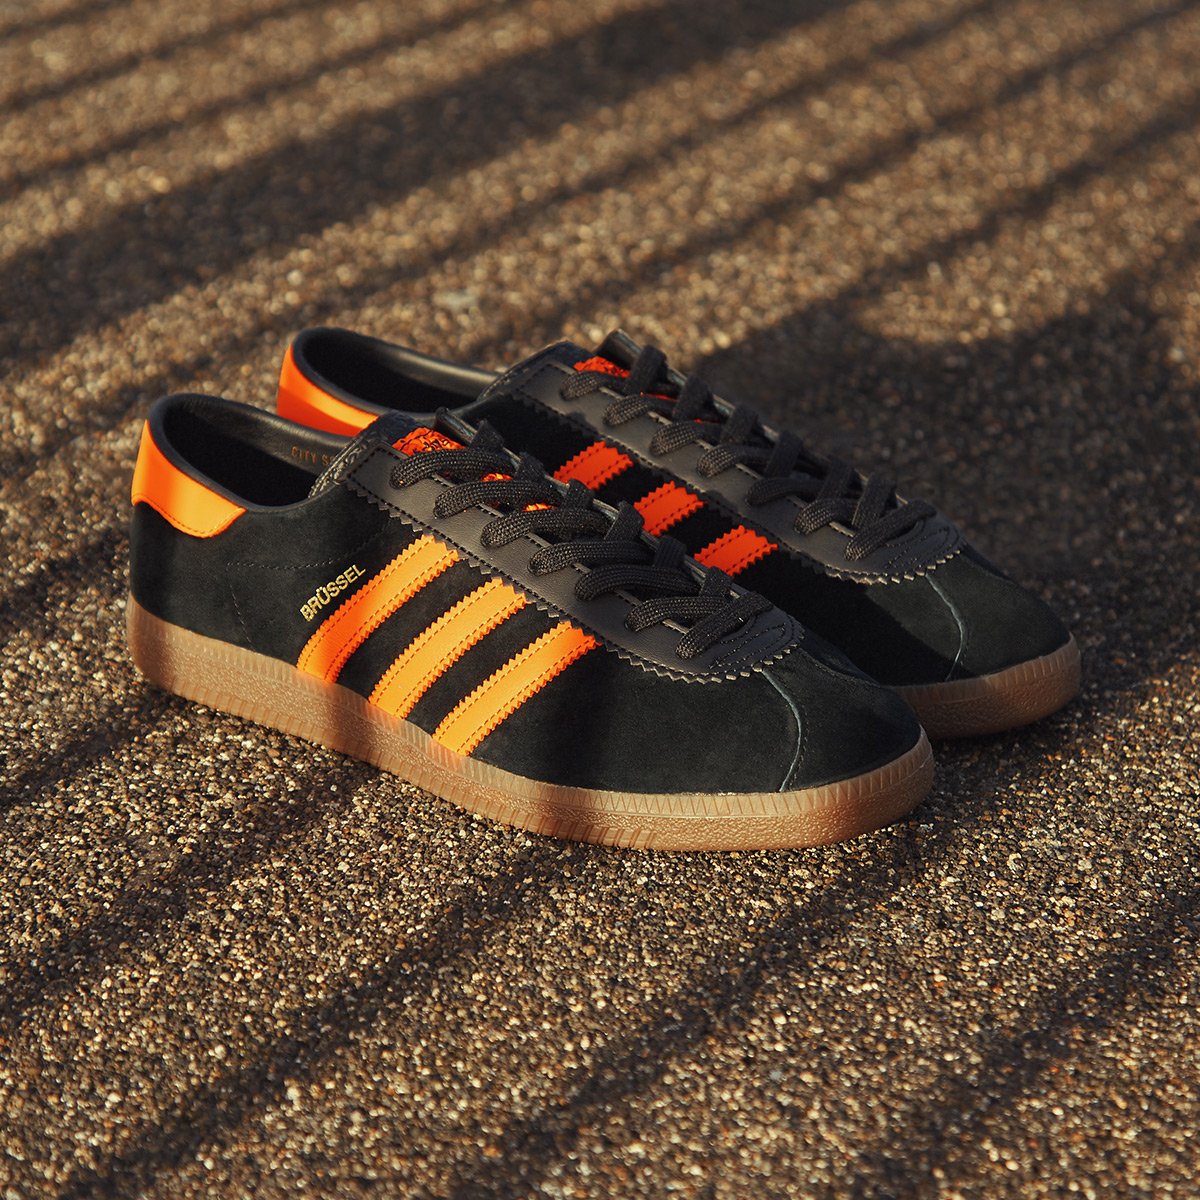 Tratar cubrir traqueteo END. on Twitter: "The adidas Brussels is available in-store today (£89).  https://t.co/X3XTEcFOCV https://t.co/oGwTgyFZRo" / Twitter